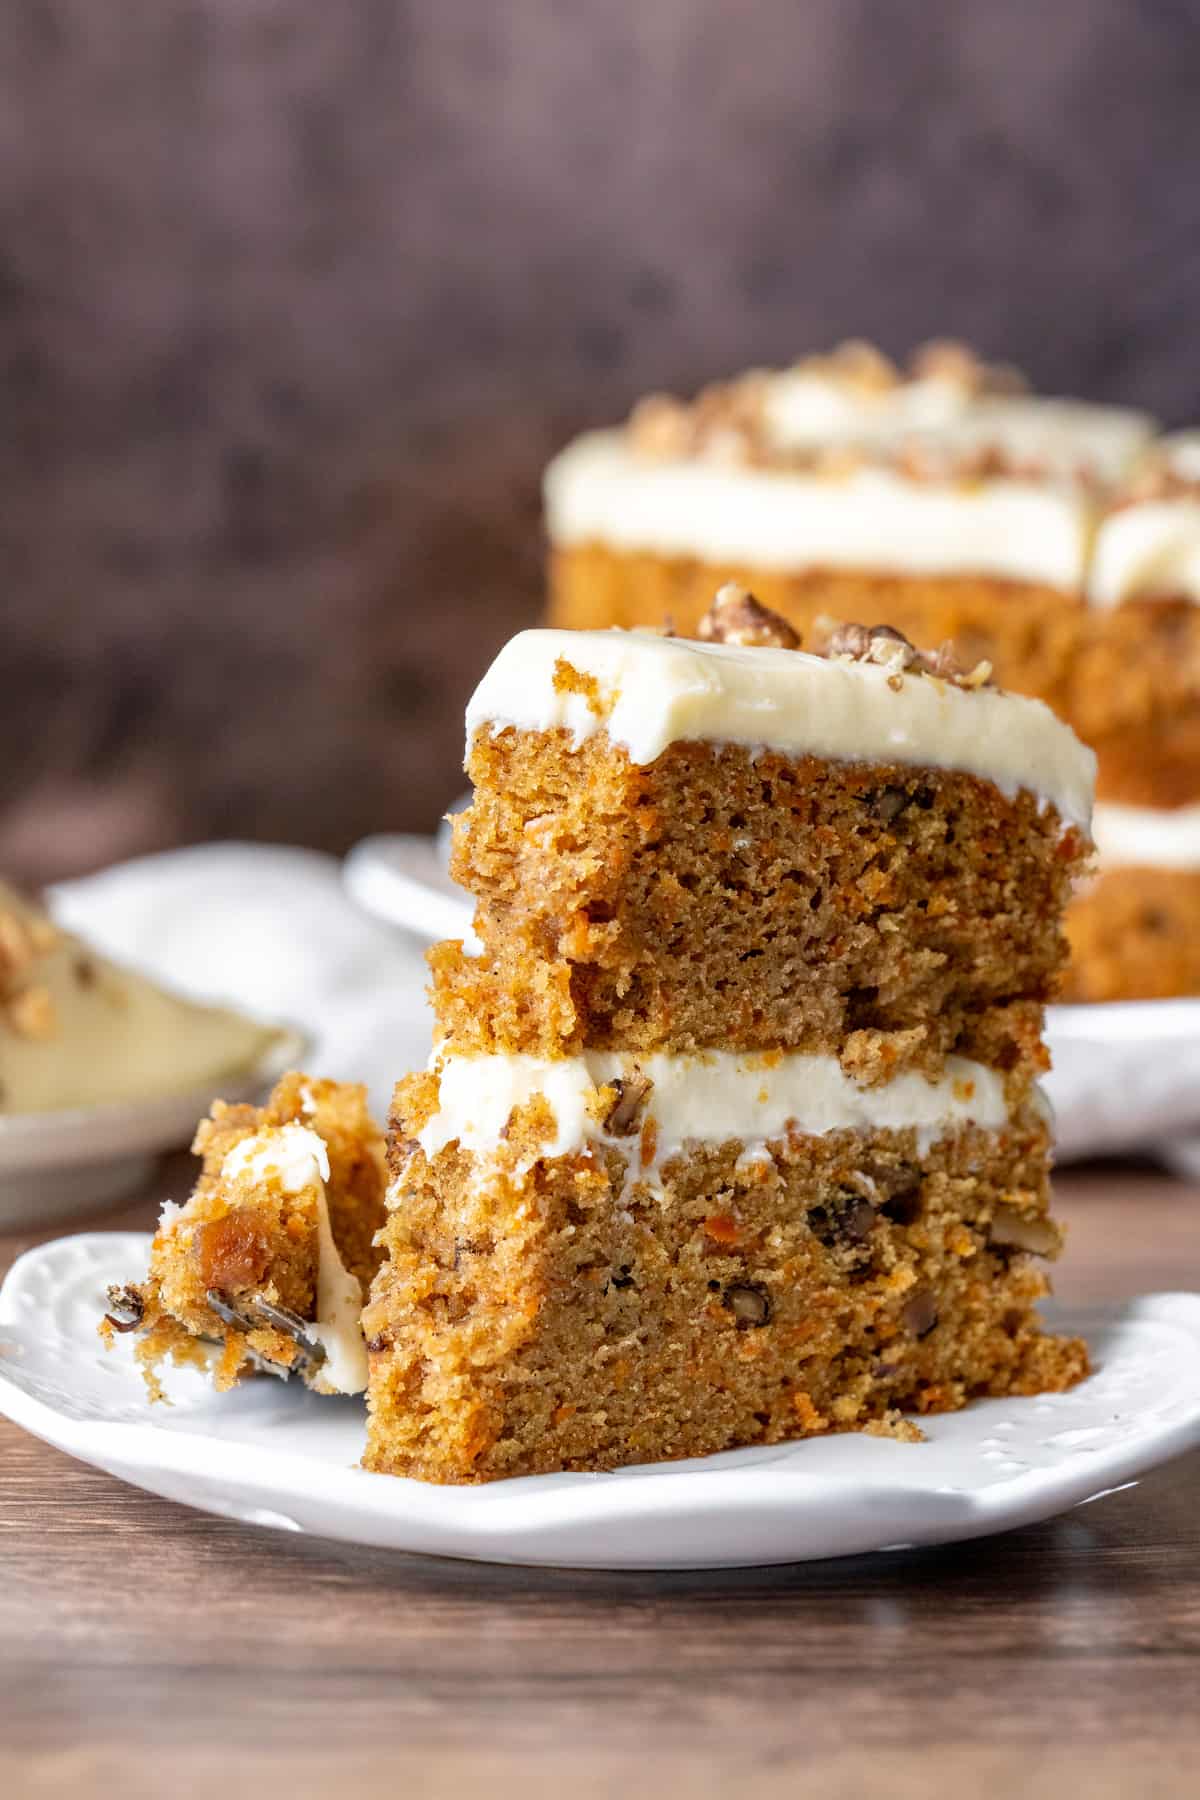 Slice of carrot cake with bite taken out